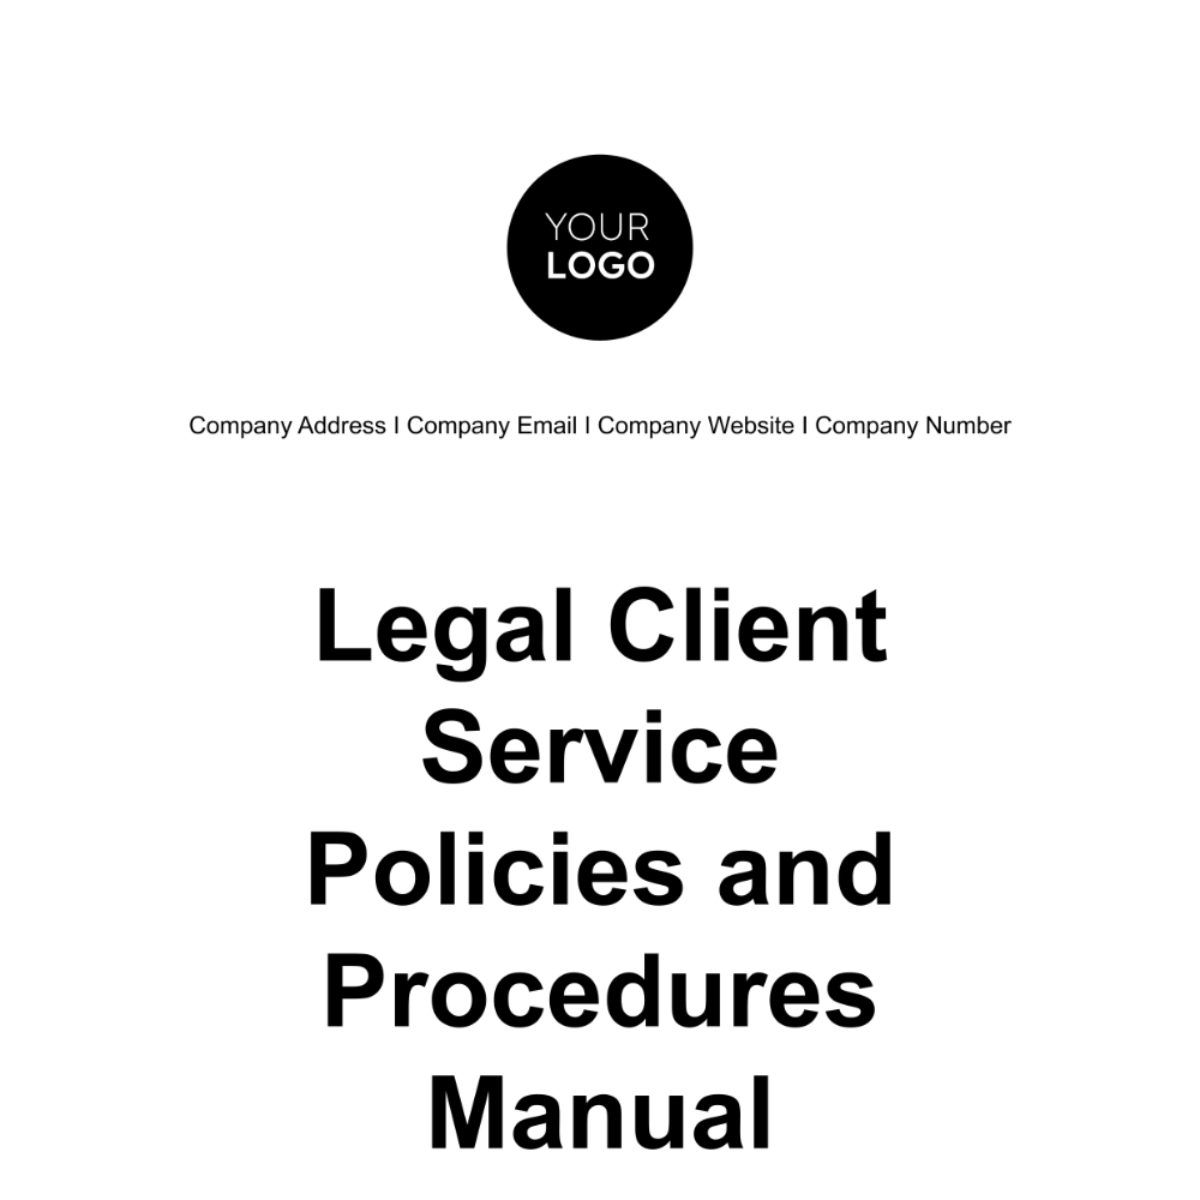 Legal Client Service Policies and Procedures Manual Template